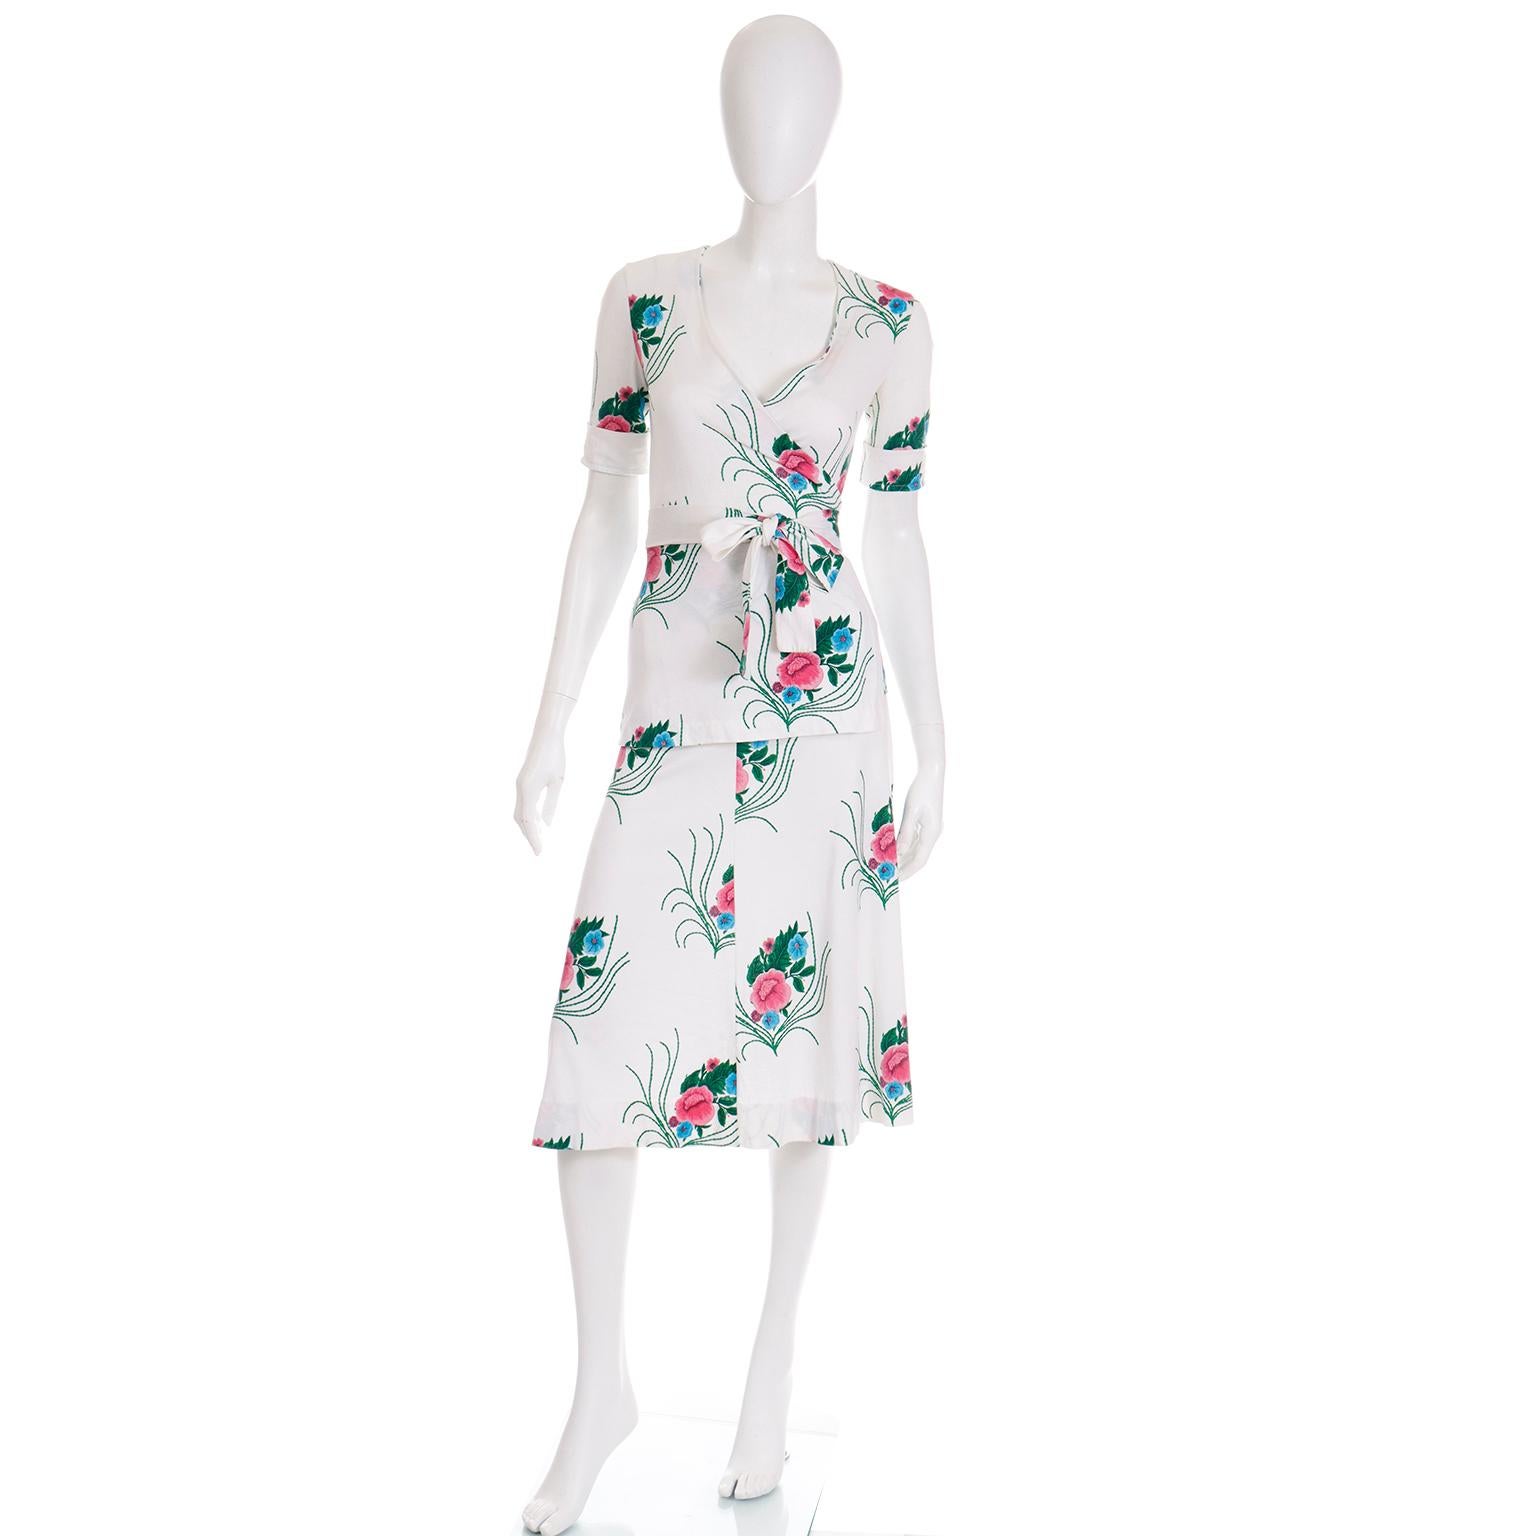 This is a really fun 2 piece outfit designed by Diane Von Furstenberg in the 1970's for Miss Magnin at I Magnin. The 2 pc dress is in a pink blue and green floral print on a white background. Made in Italy of 50% Cotton and 50% rayon. The top is